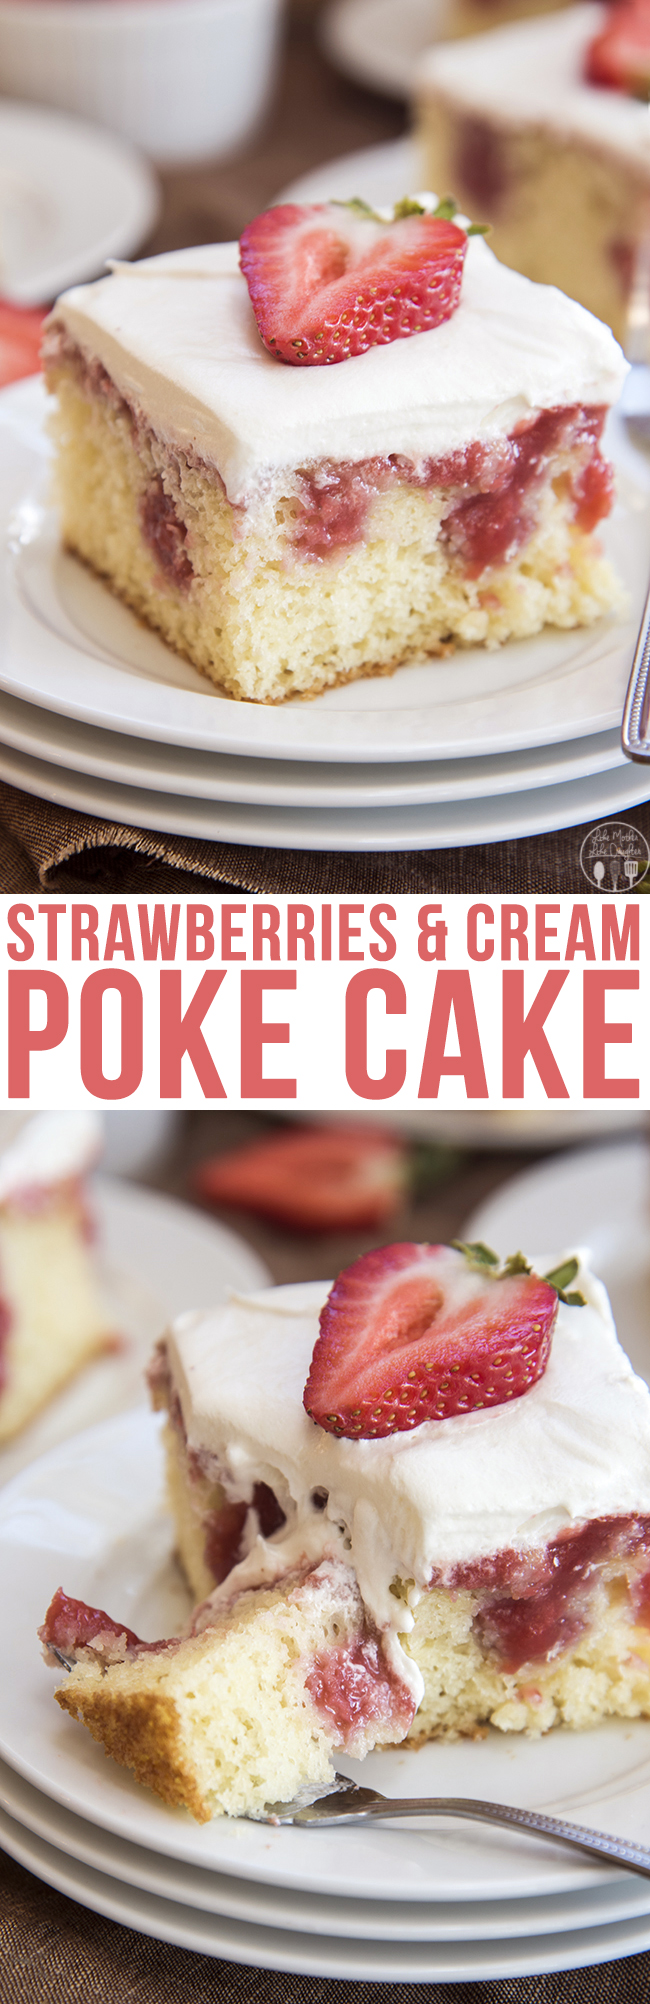 Title card for strawberries and cream poke cake.